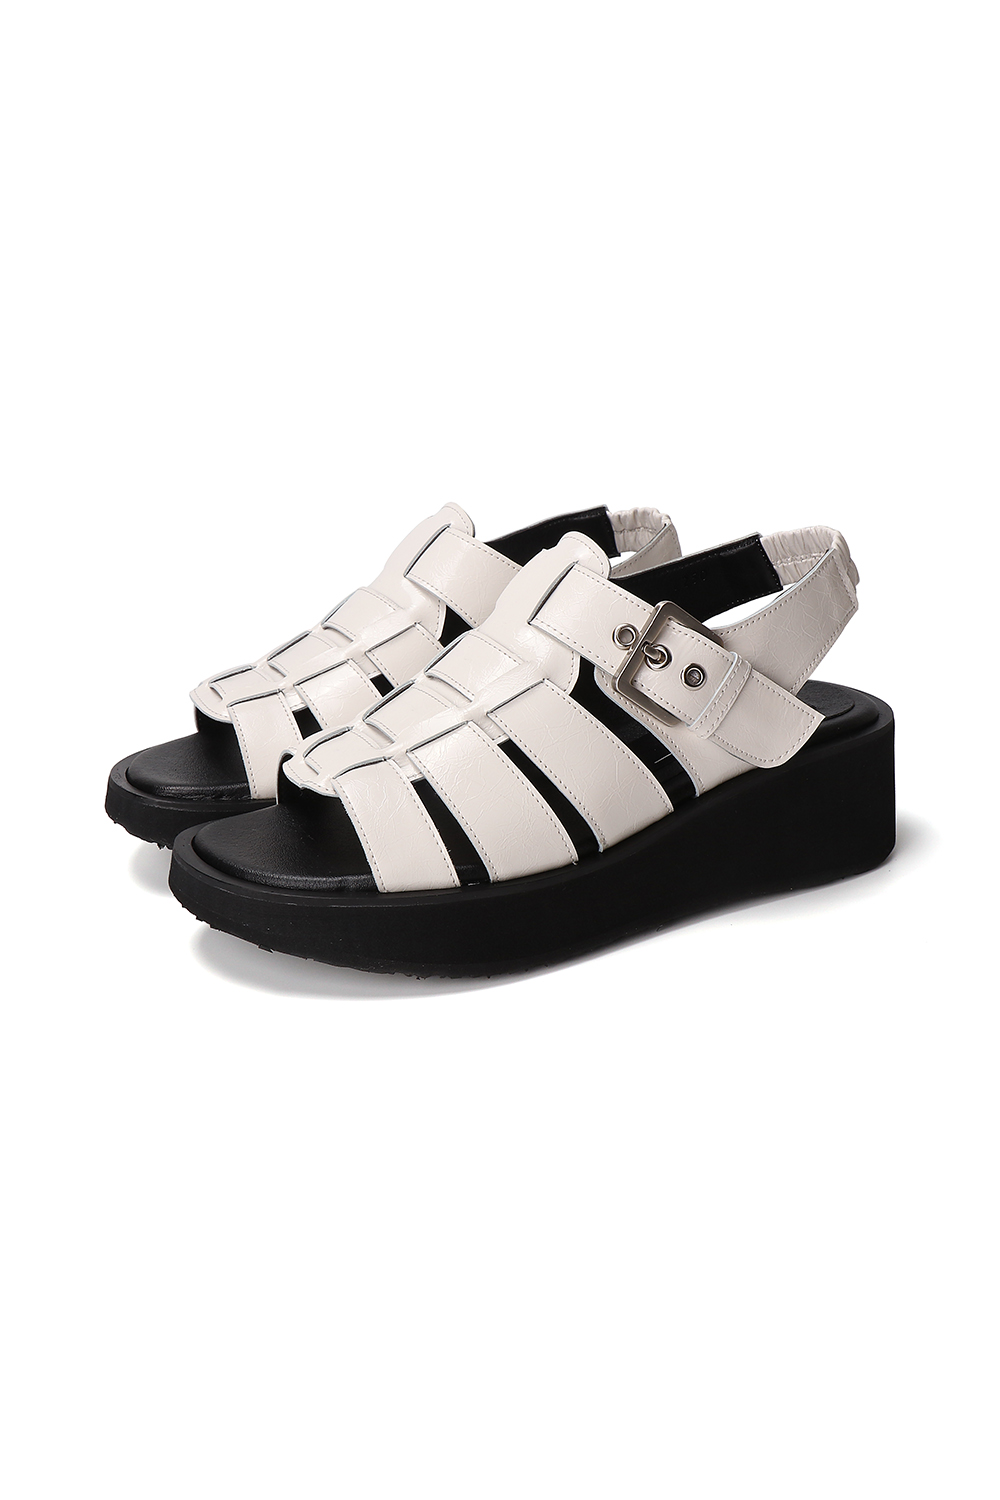 MILLY CHUNKY SANDALS [CREAM]